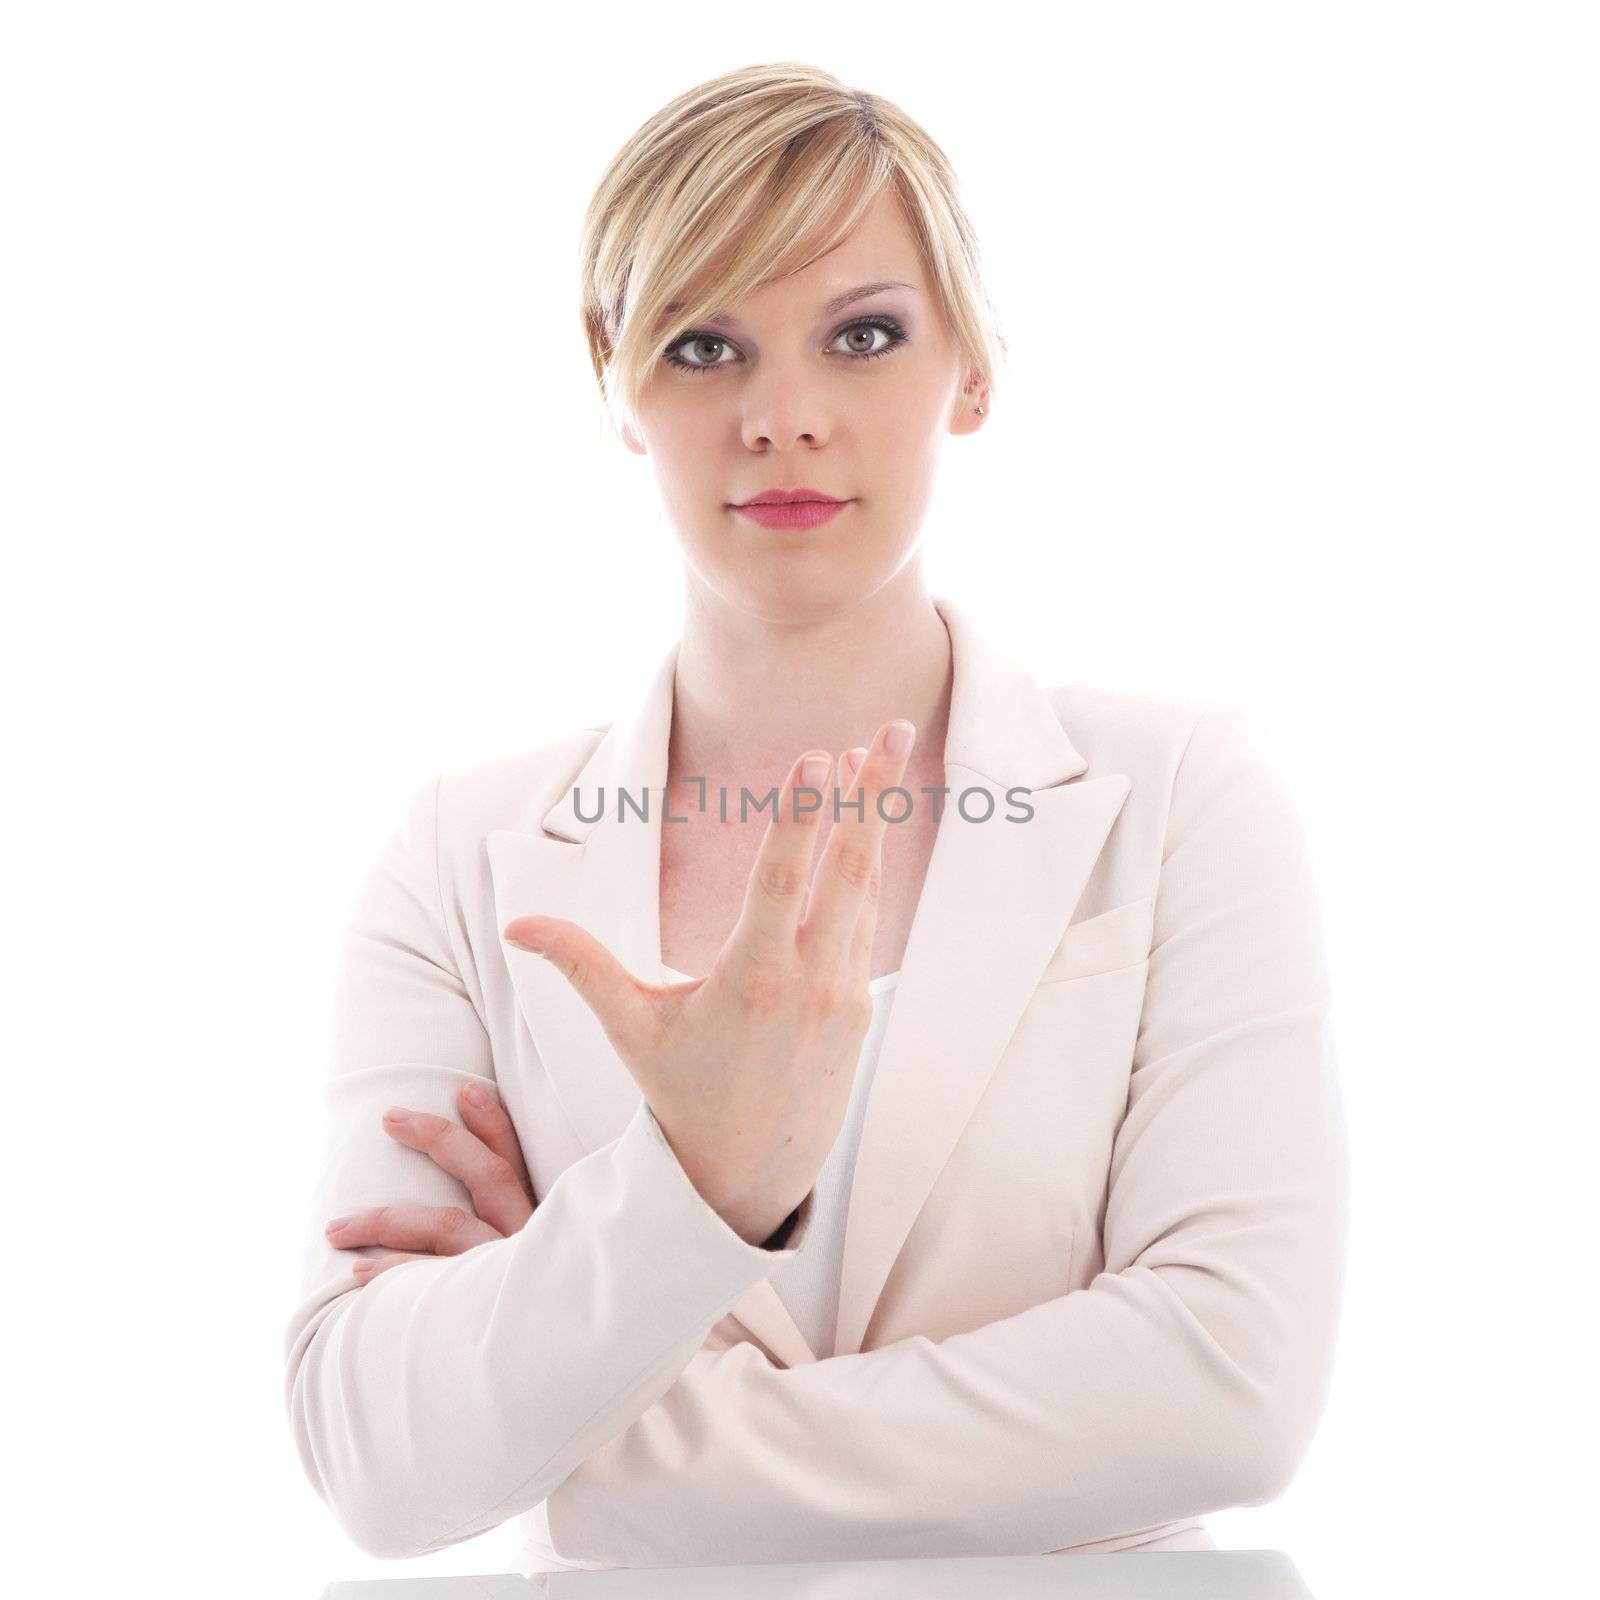 Attractive young professional woman with a serious earnest expression gesticulating with her hand isolated on white